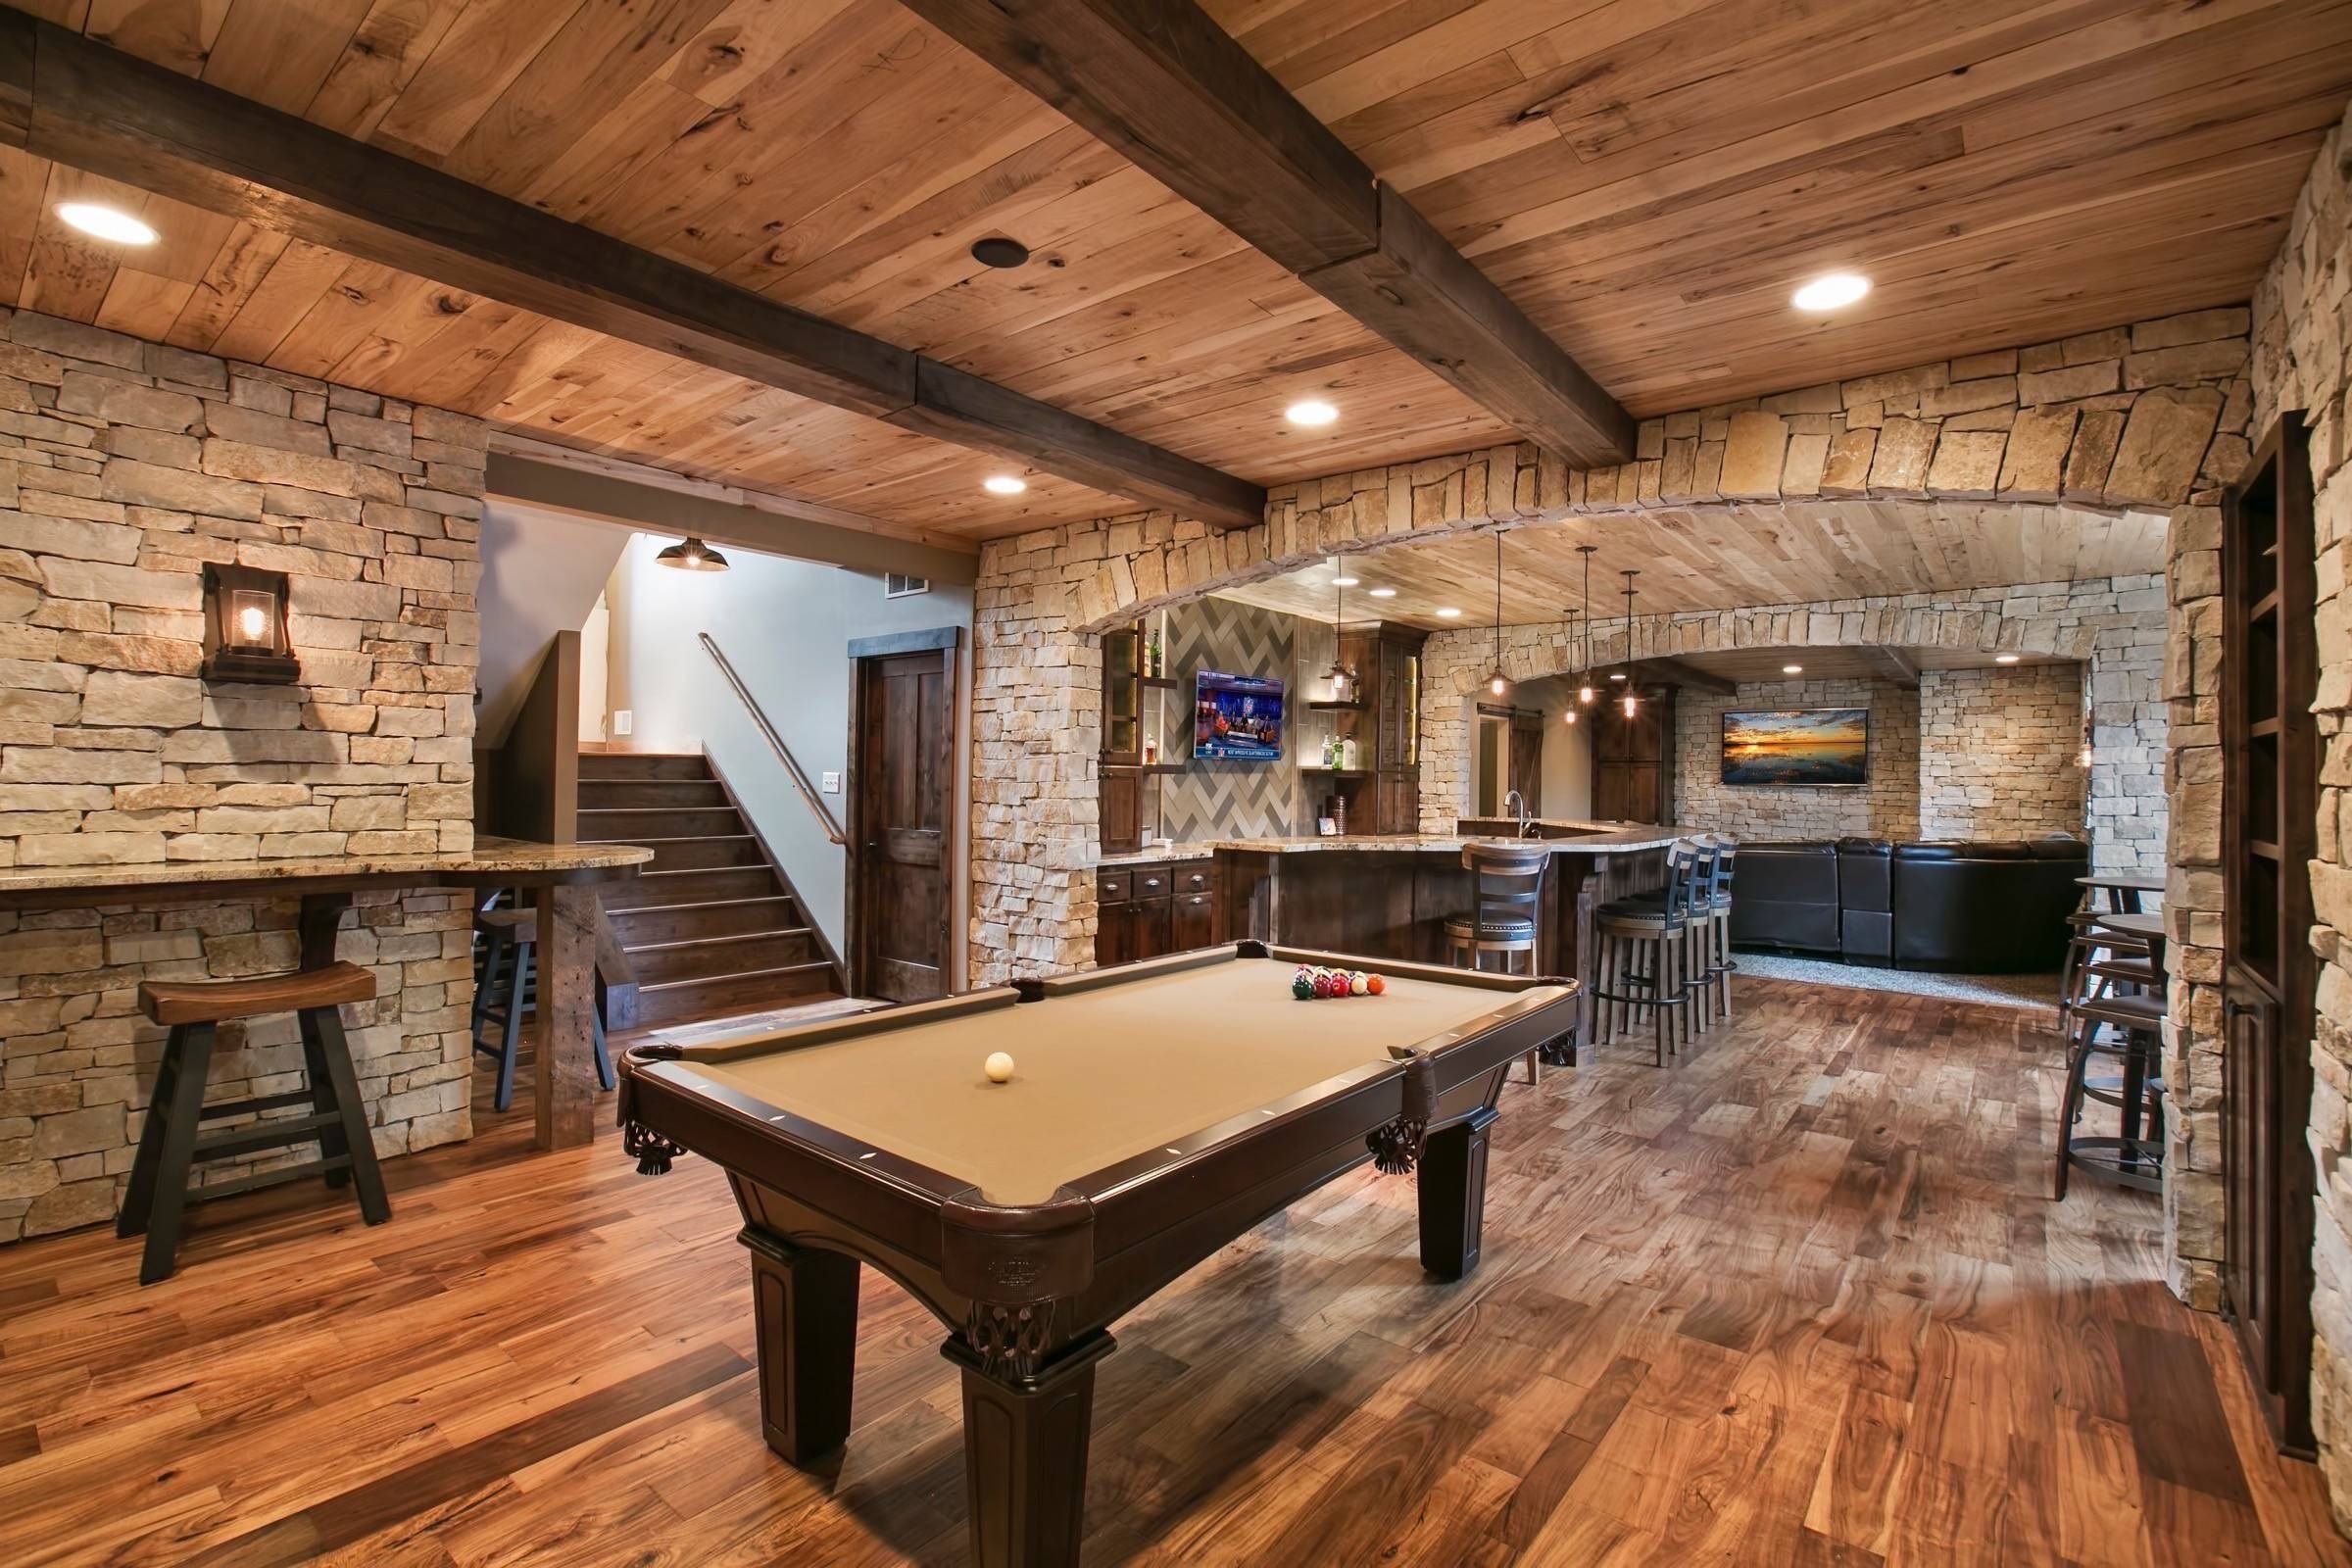 Rustic box beam ceiling accentuating a kitchen/bar basement space